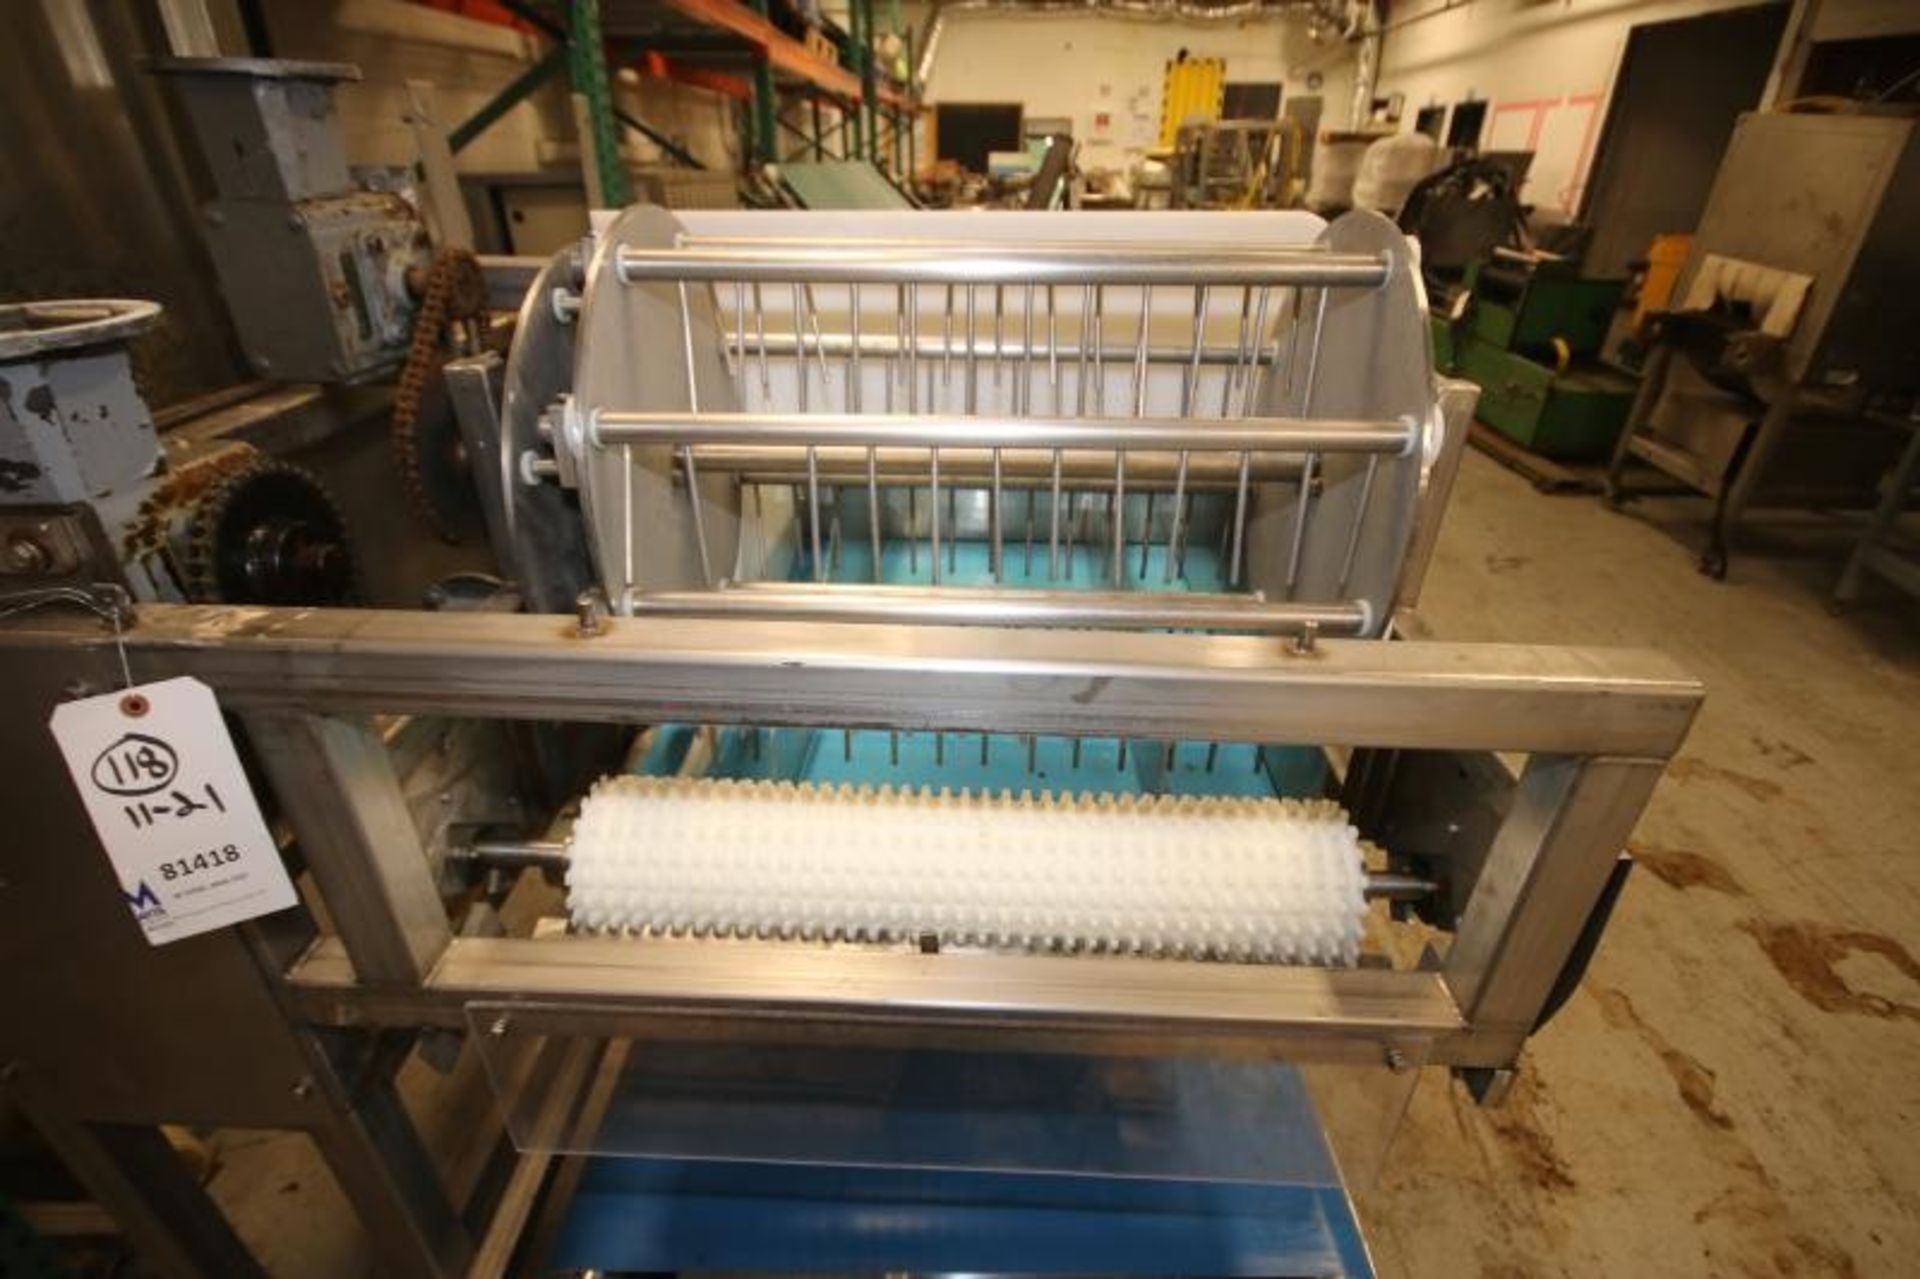 25" W S/S Waterfall Topping Applicator Mounted on Aprox. 44" L Conveyor with 29" W Belt with Side - Image 4 of 7